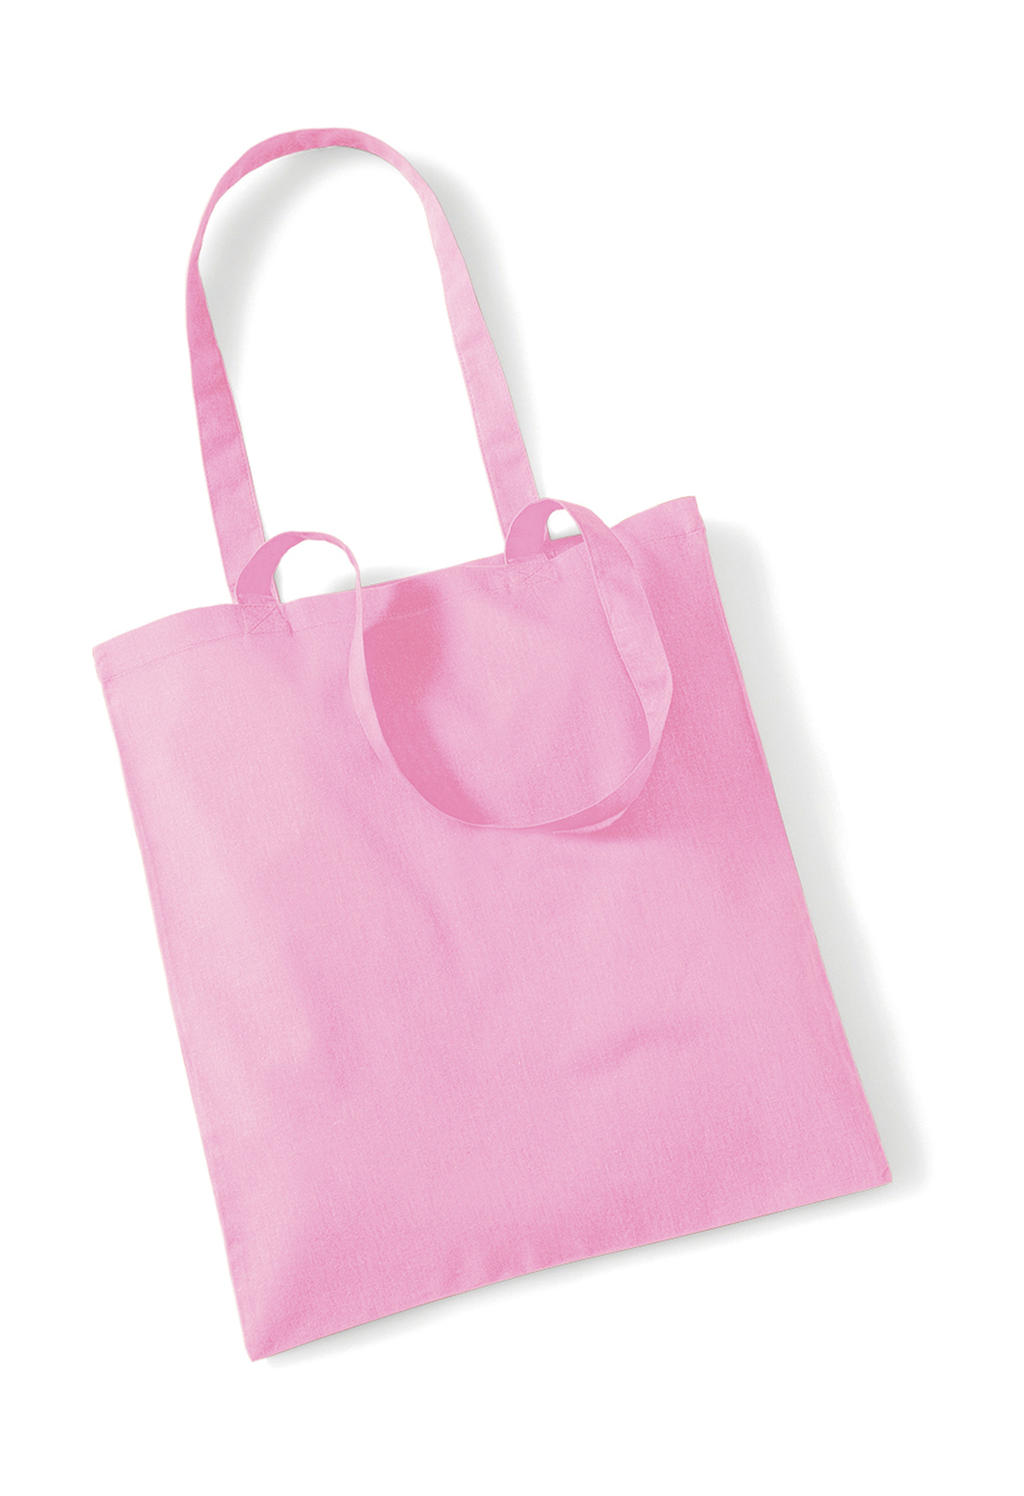  Bag for Life - Long Handles in Farbe Classic Pink